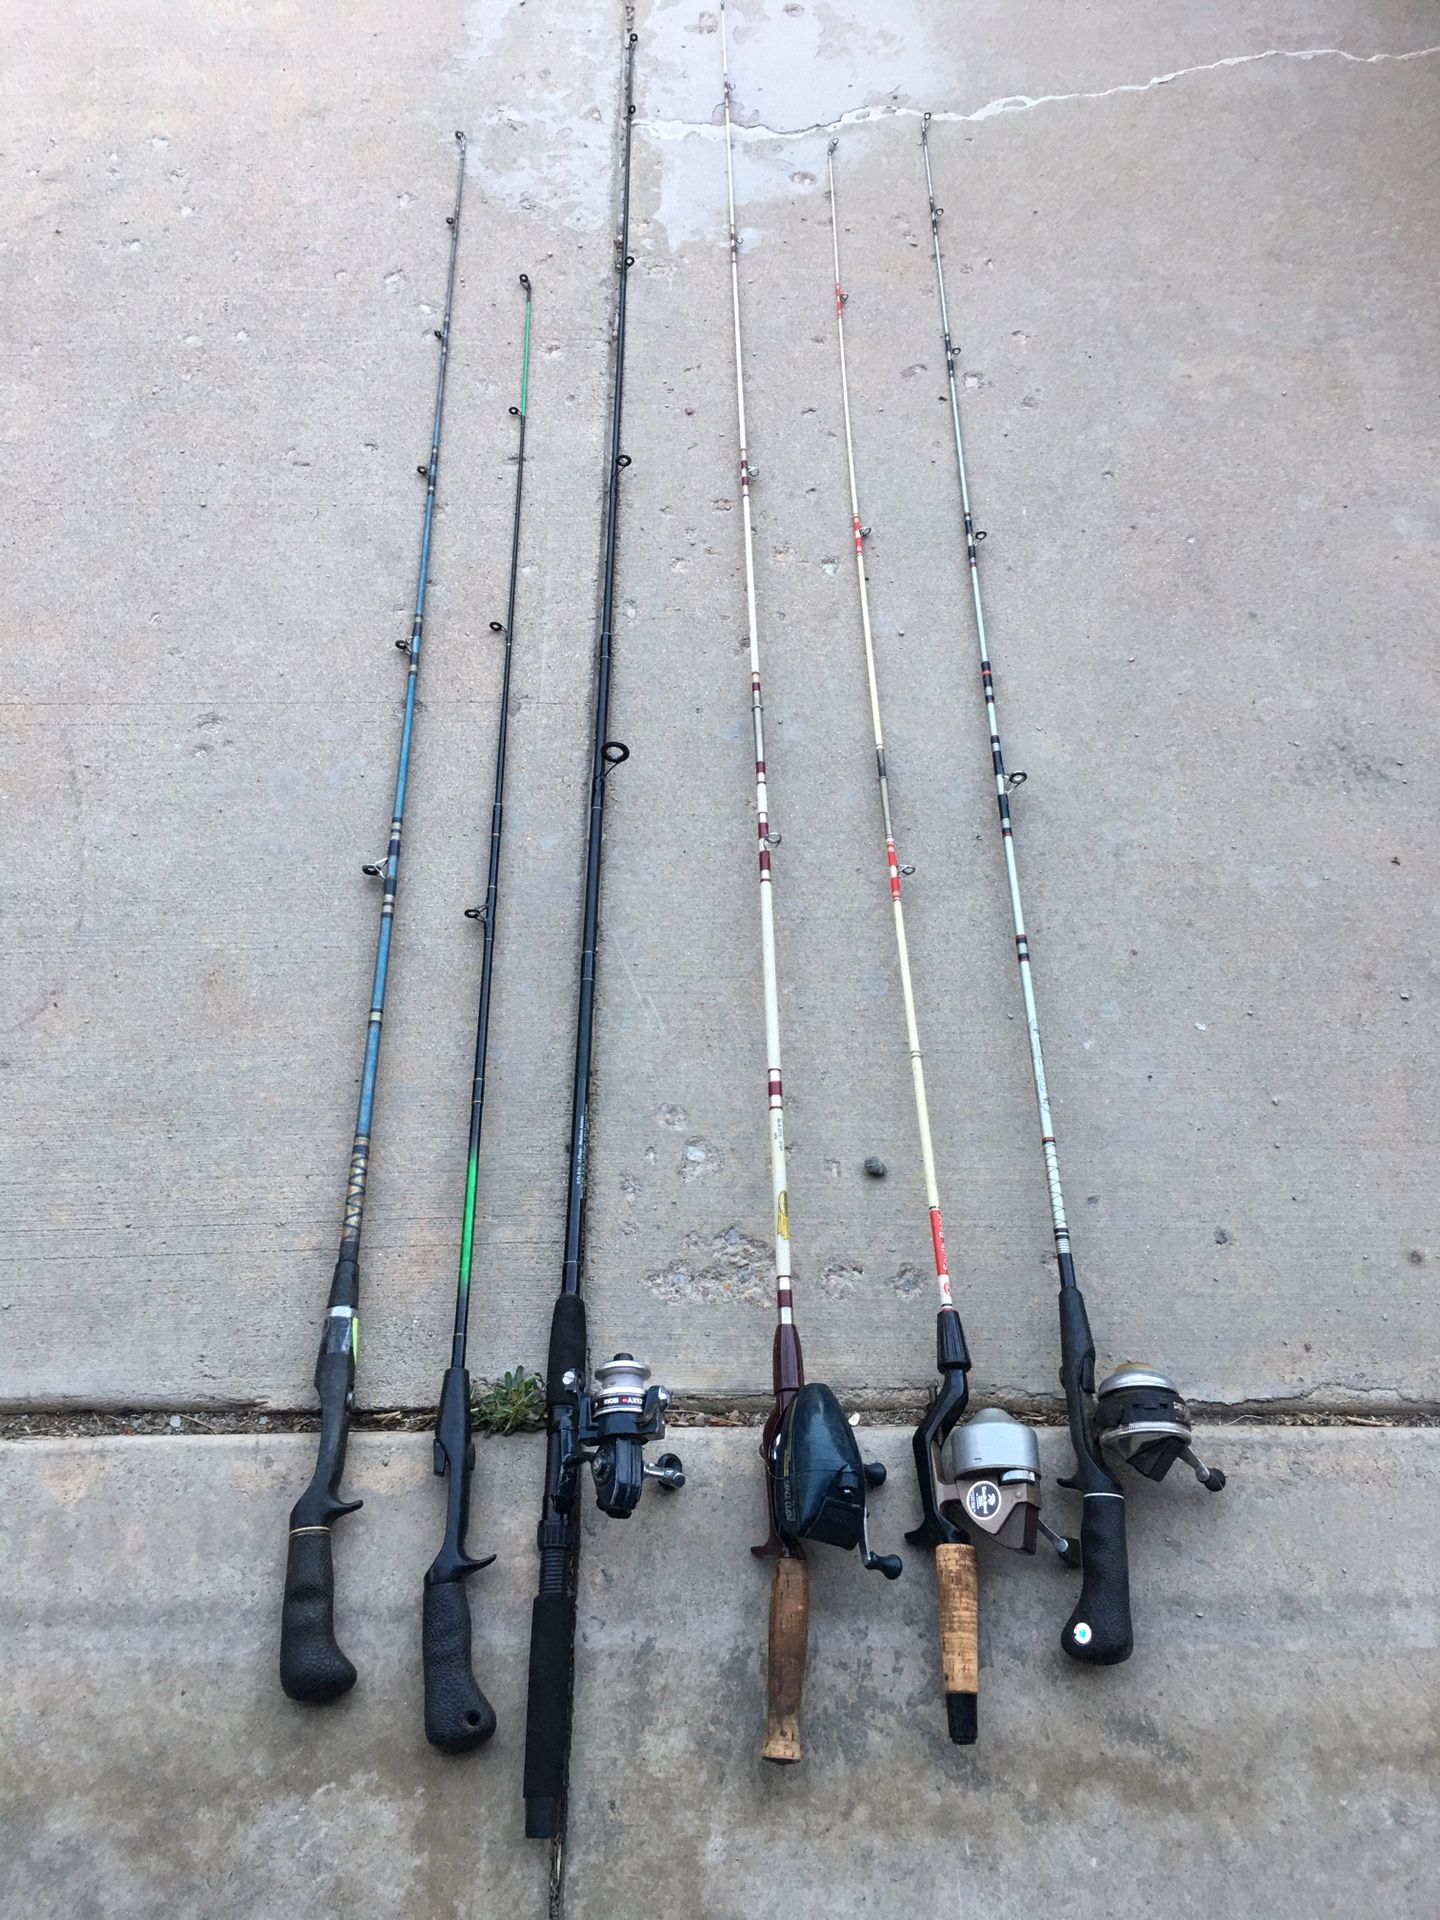 Fishing poles and reels for cheap